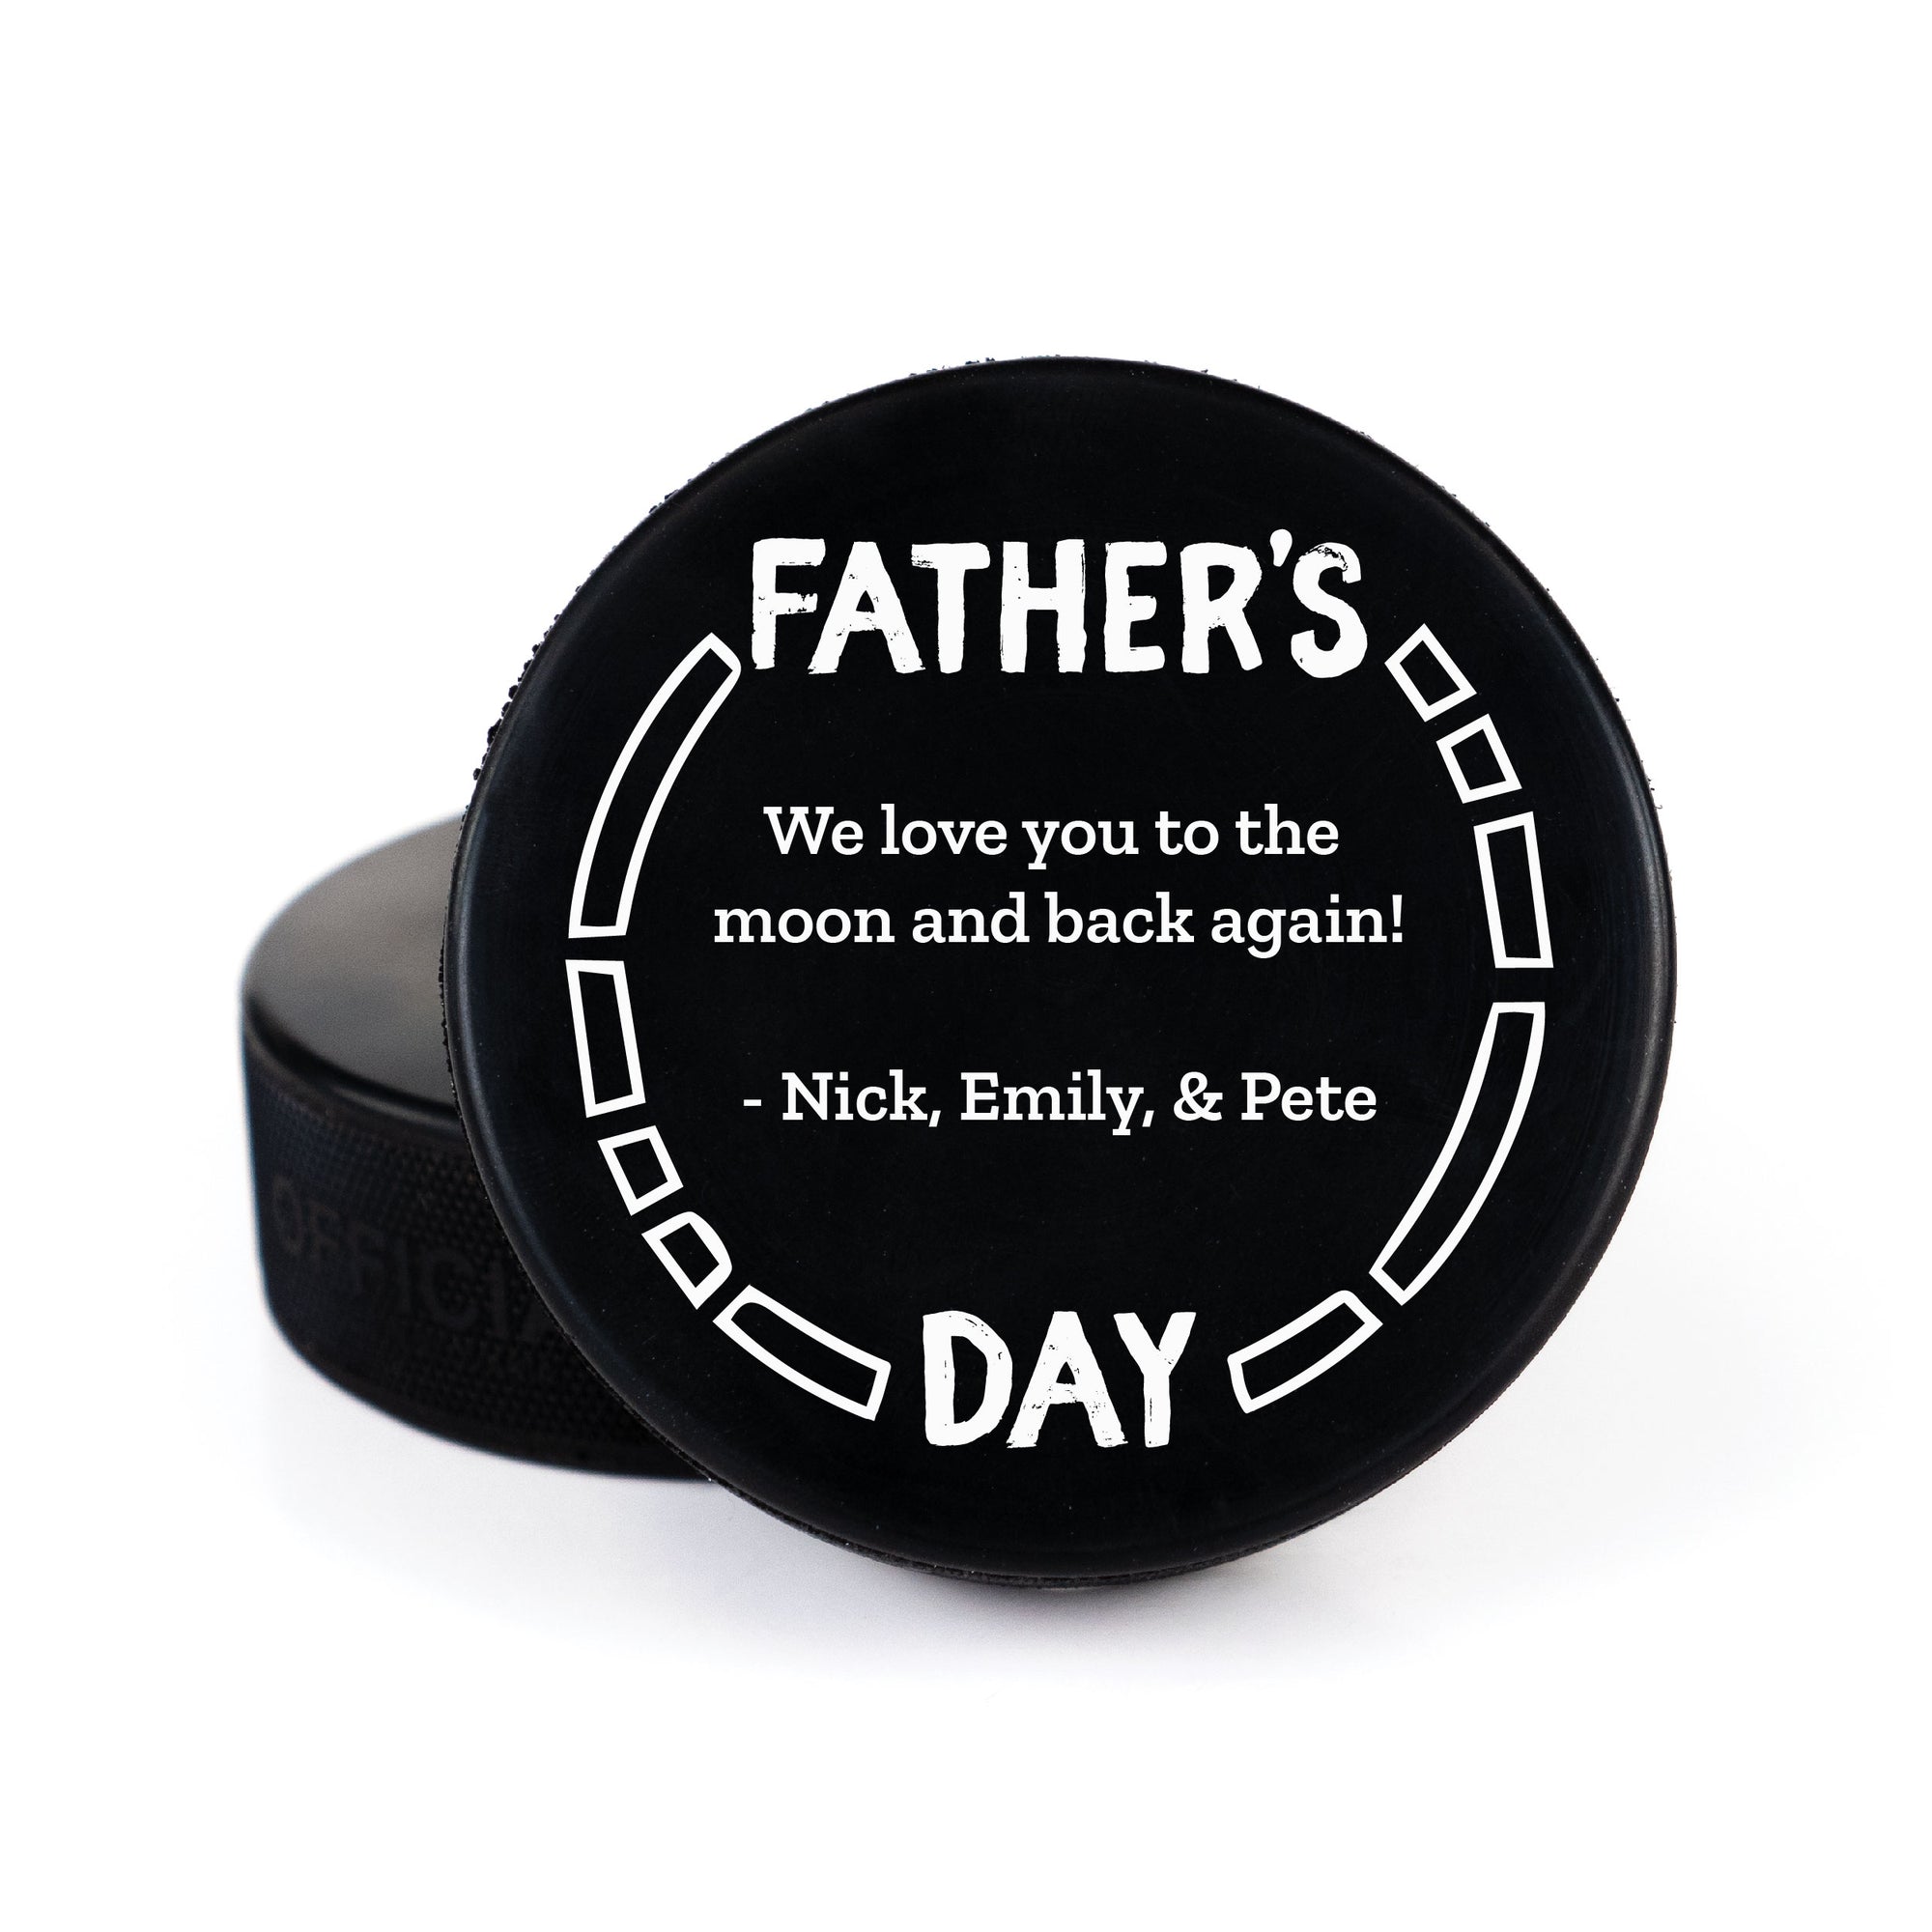 Printed Puck with Father's Day Geometric Personalization Design